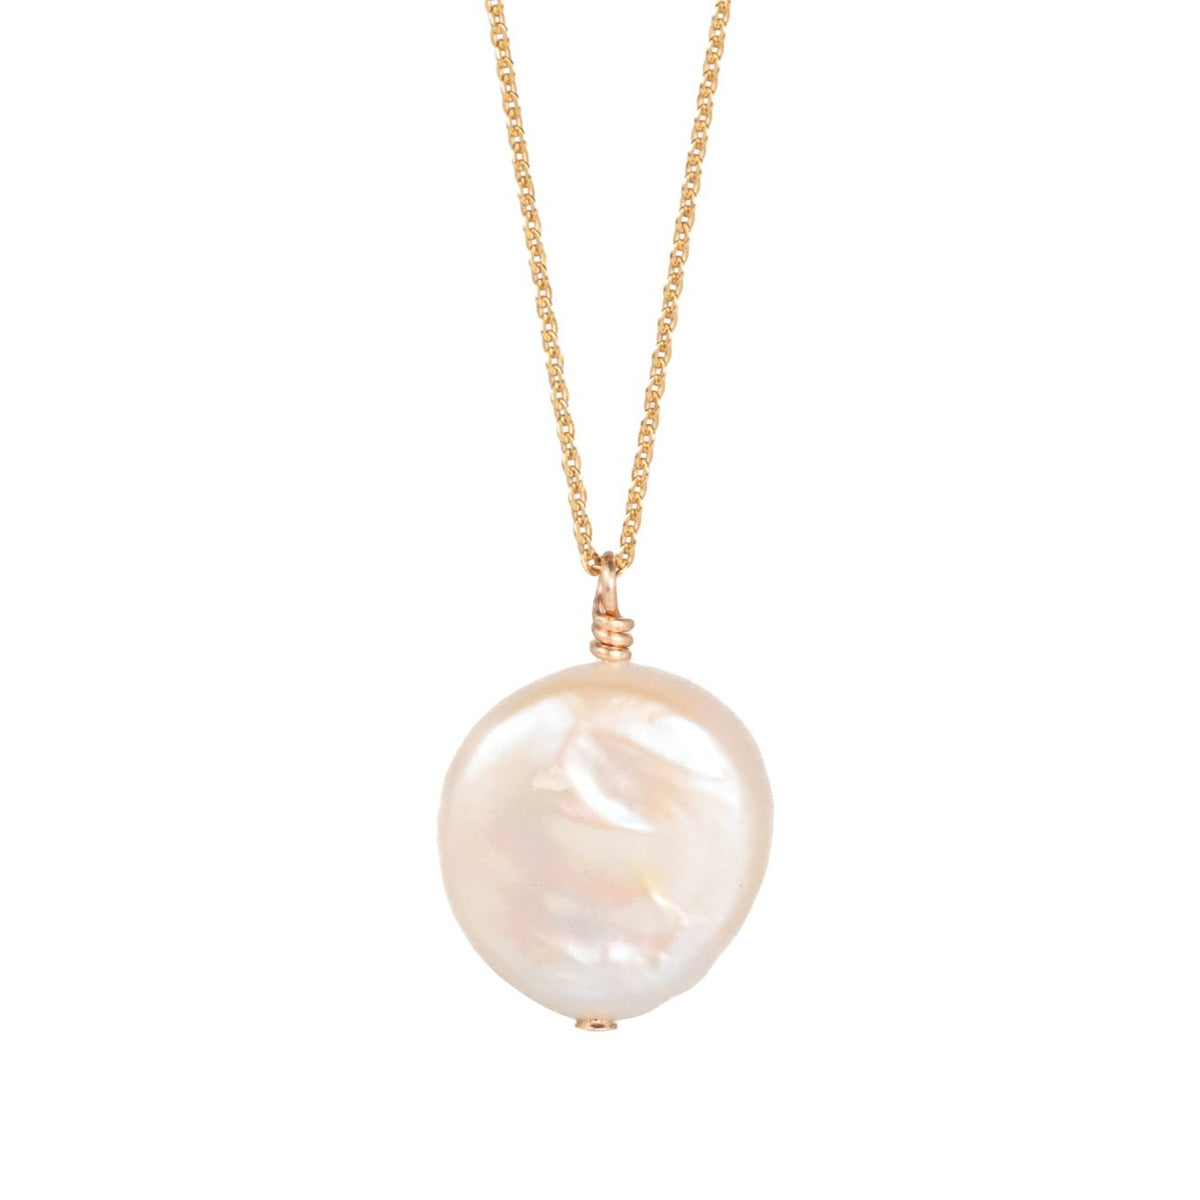 Pearl Disc Necklace - 14K gold filled